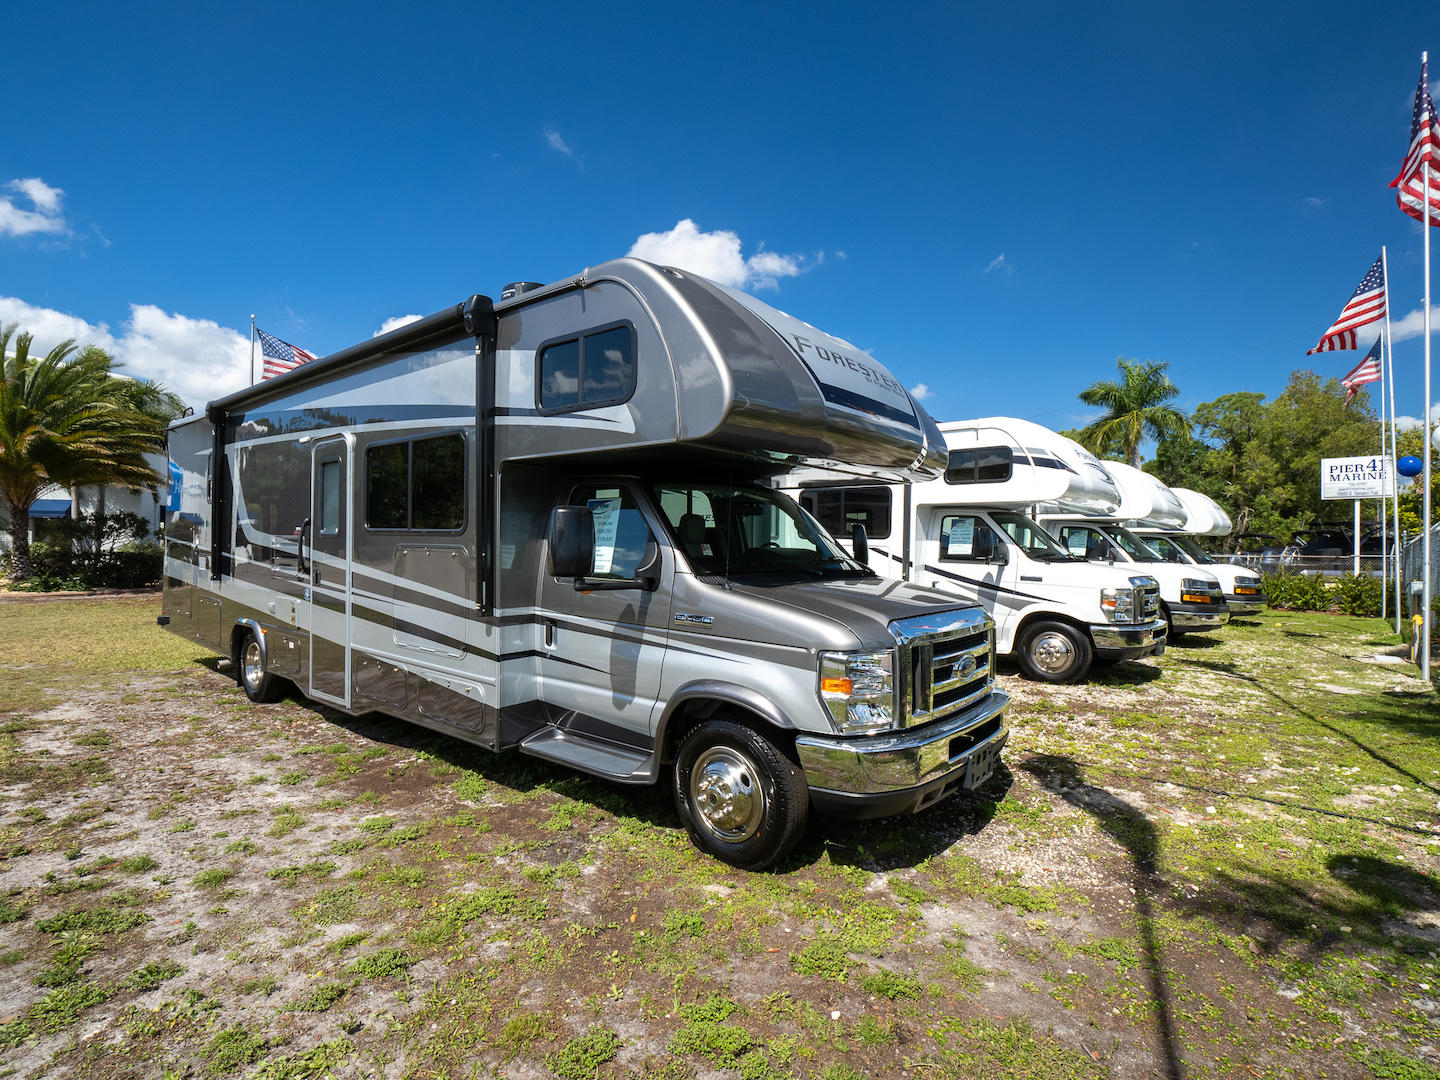 RV One Superstores Fort Myers Photo